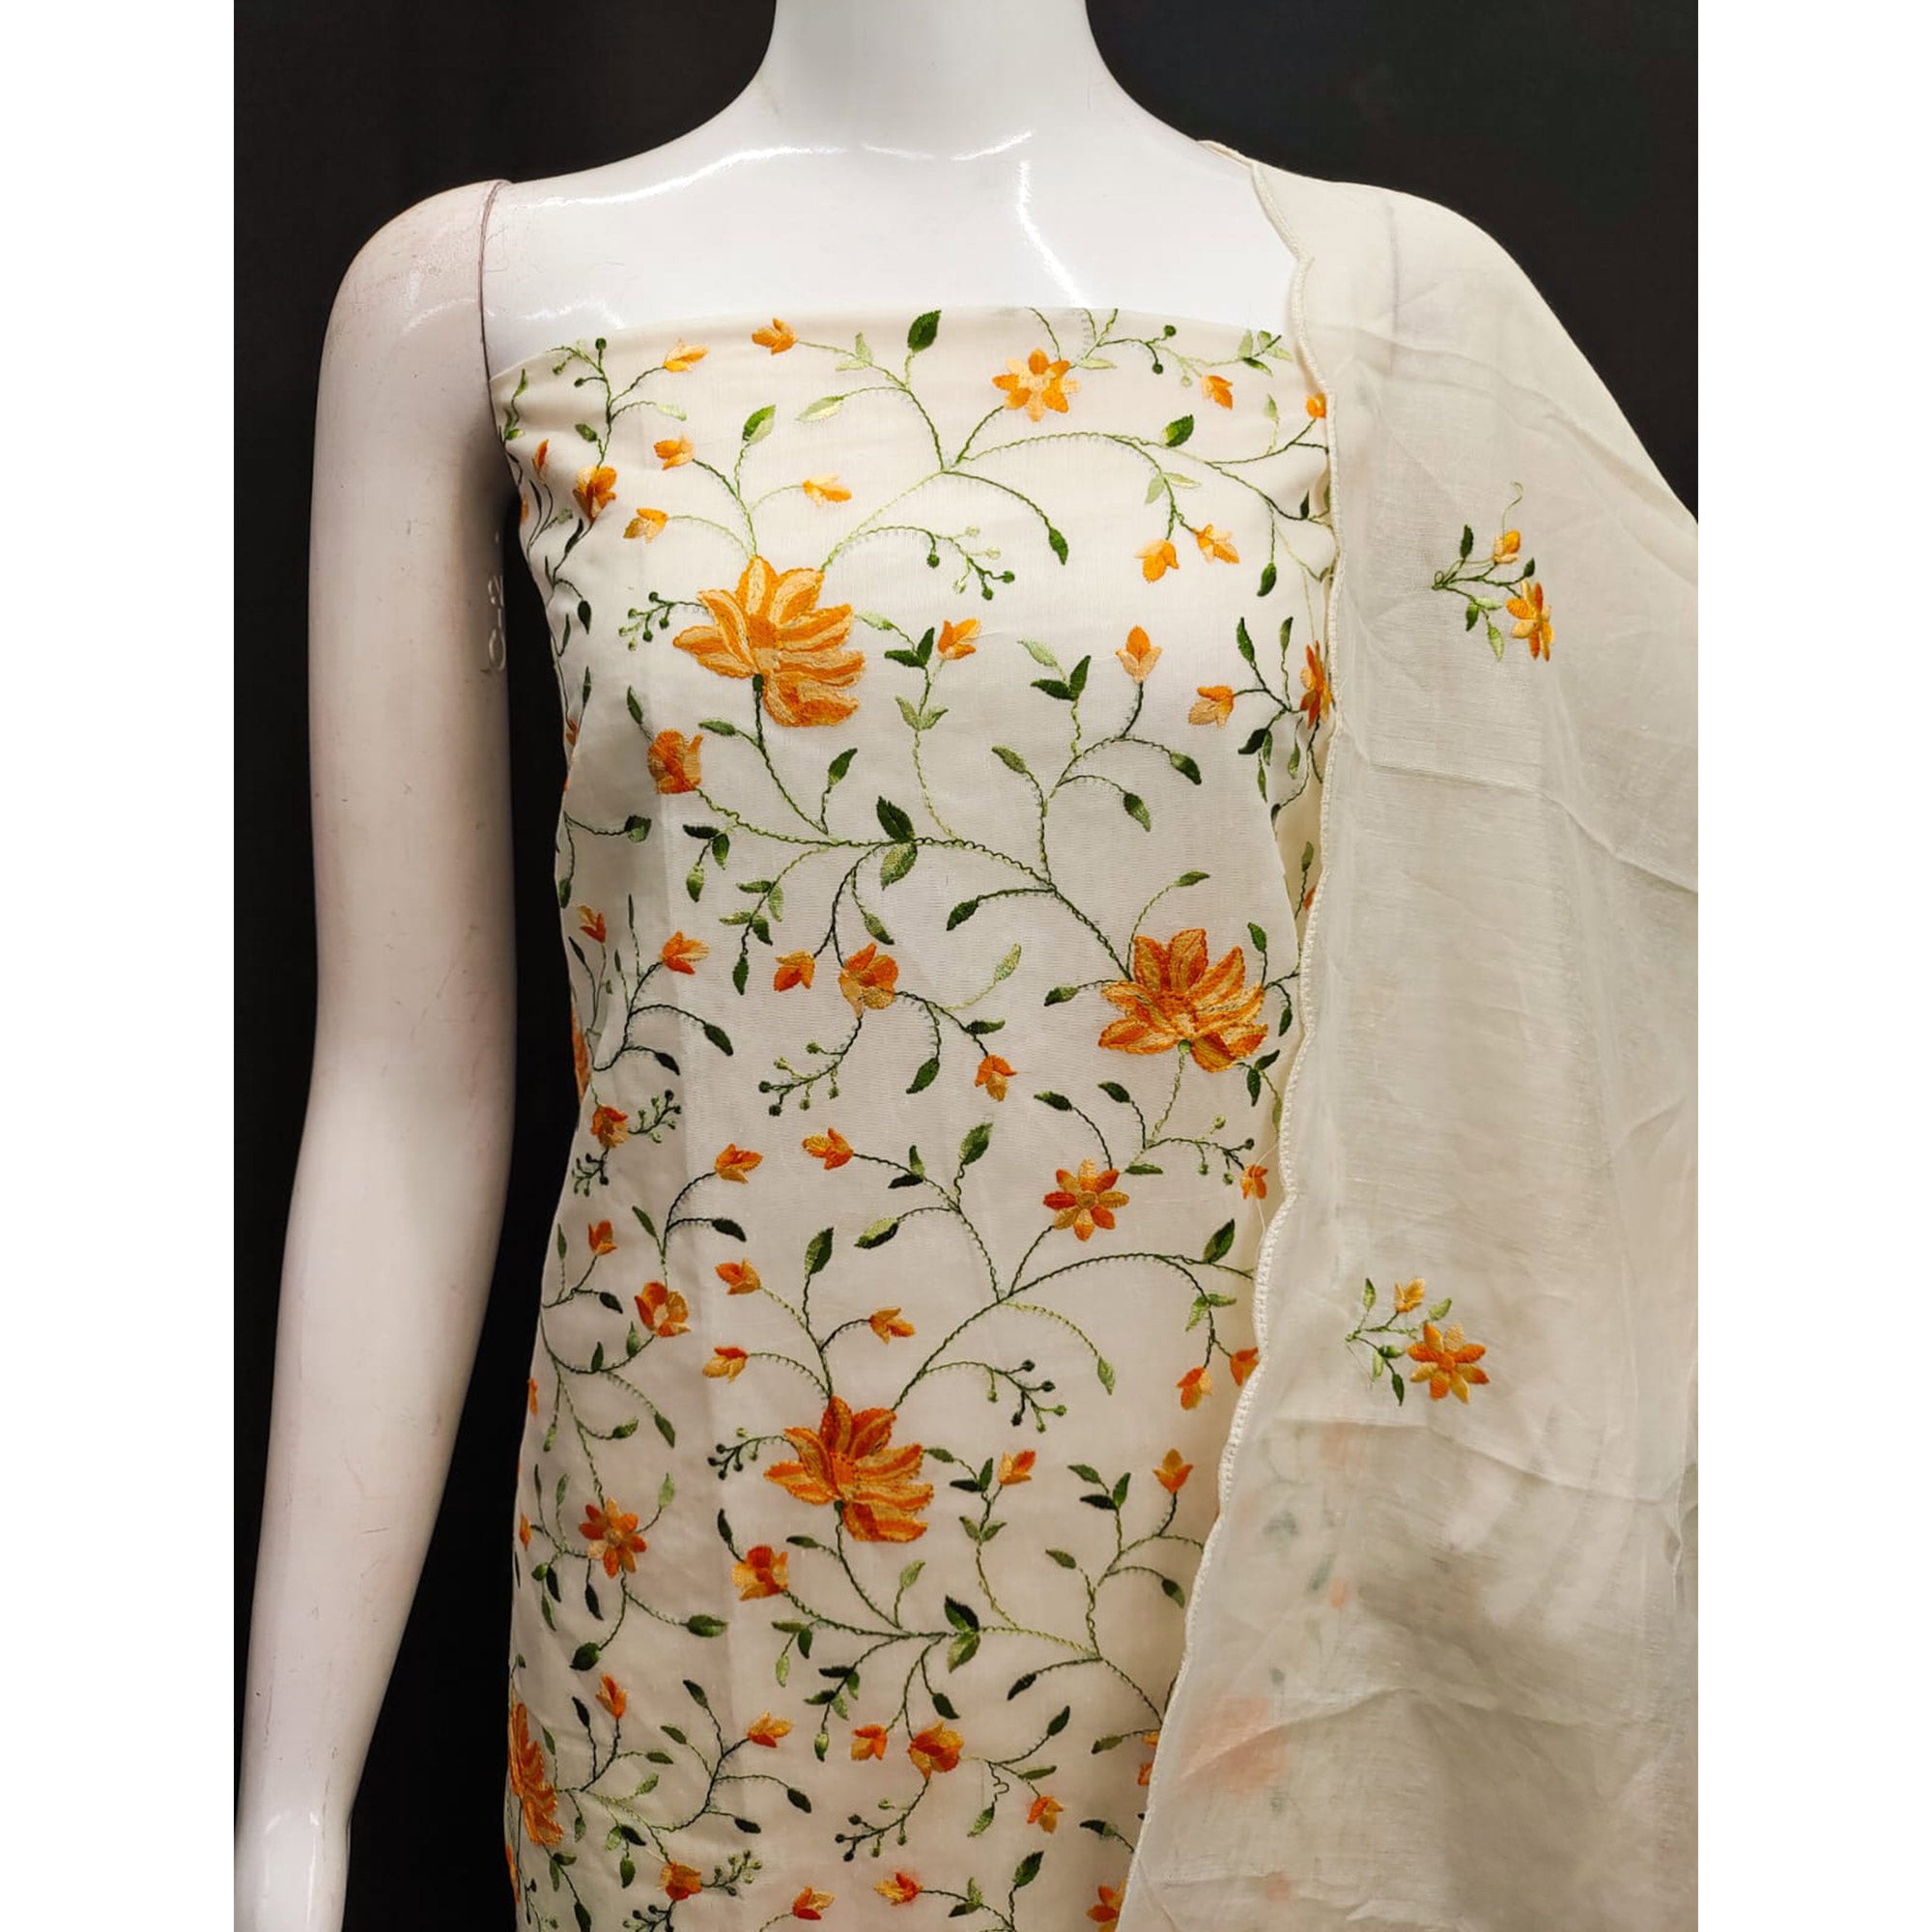 Off White & Yellow Floral Embroidered Chanderi Silk Dress Material